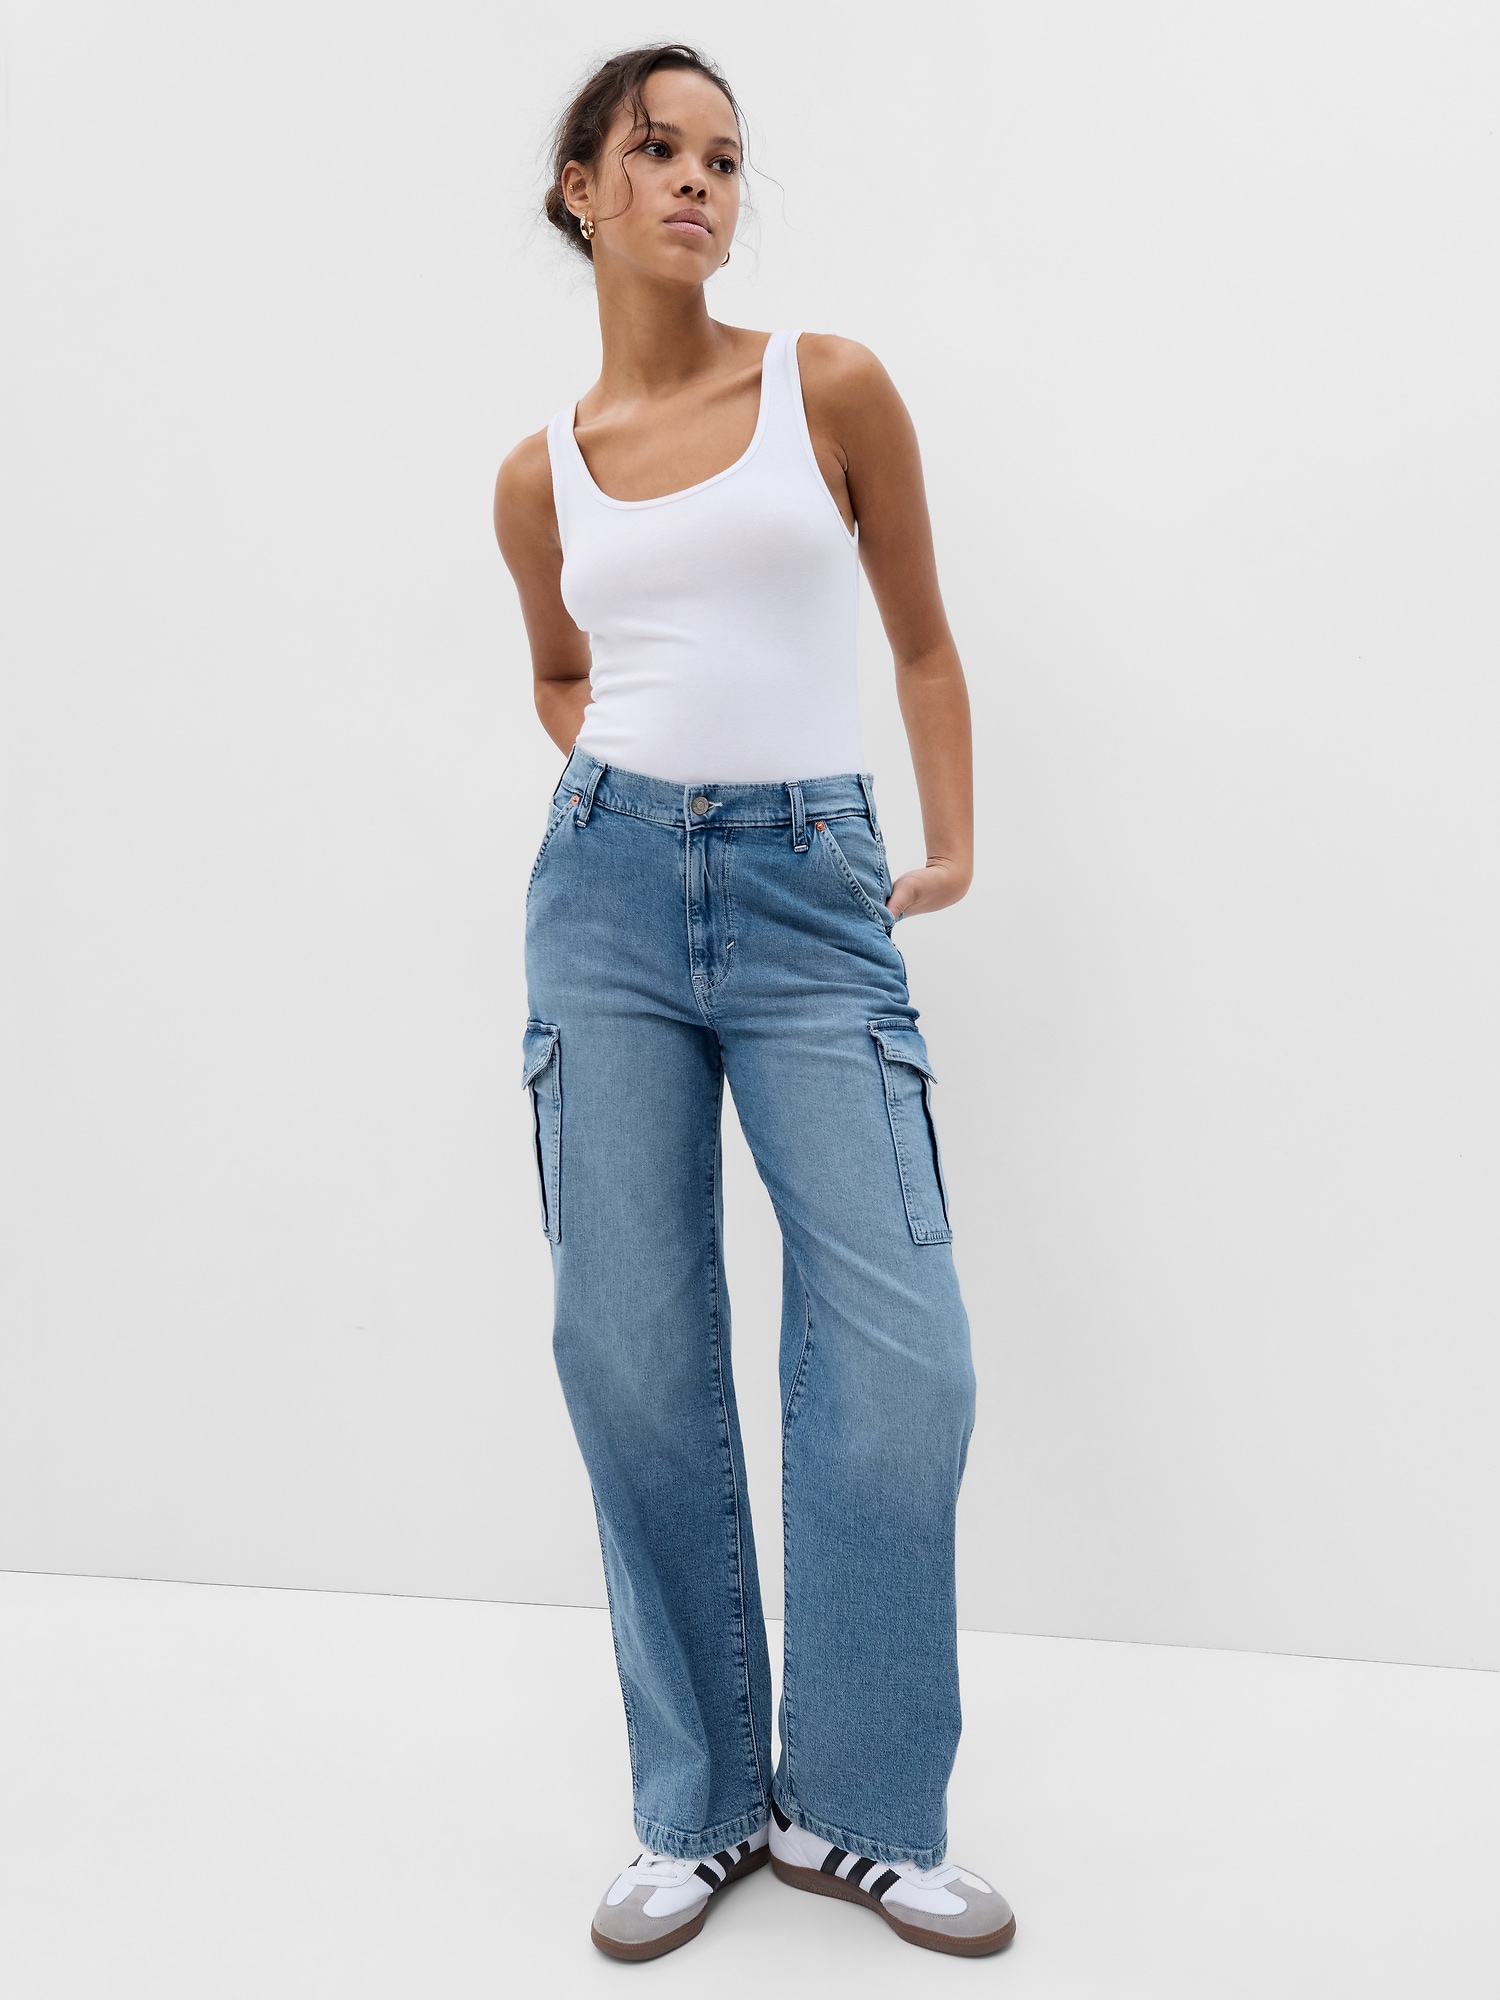 Fashion Cargo Pants Women's Jeans 2022 New Fashion Baggy Jeans Denim  Overalls 90s Low @ Best Price Online